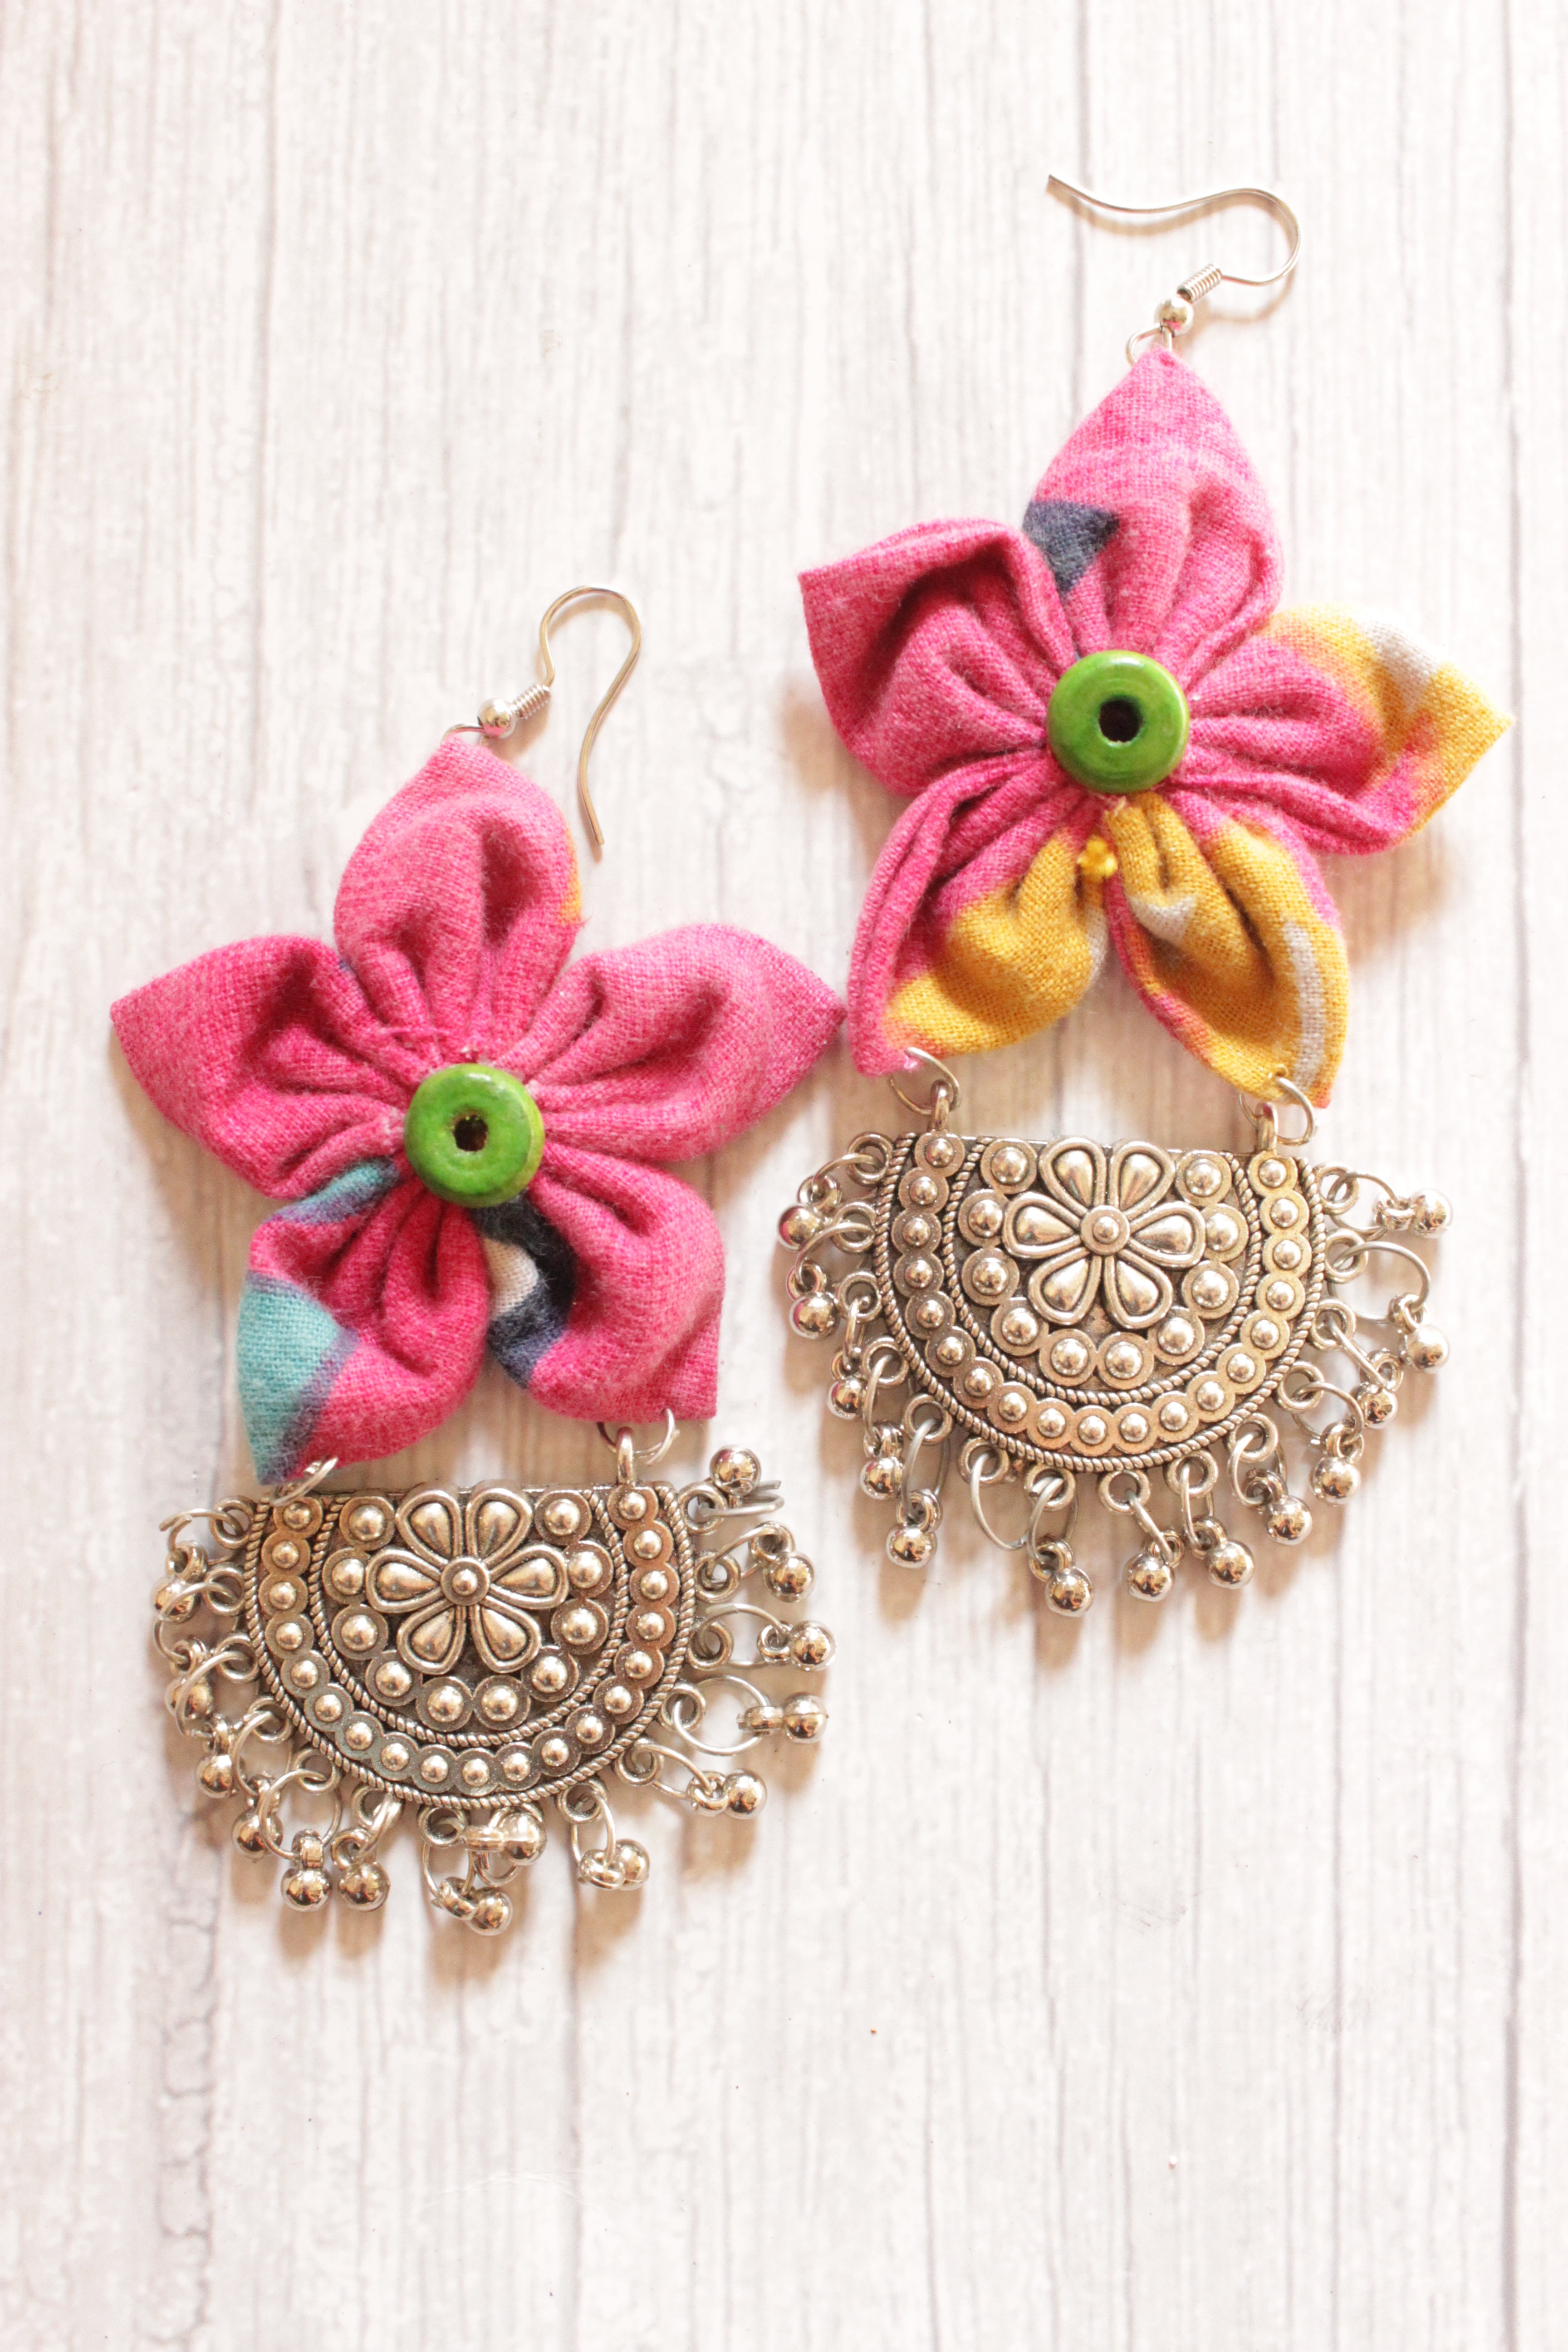 Pink Fabric Handmade Flower Earrings Embellished with Semi-Circular Metal Accent